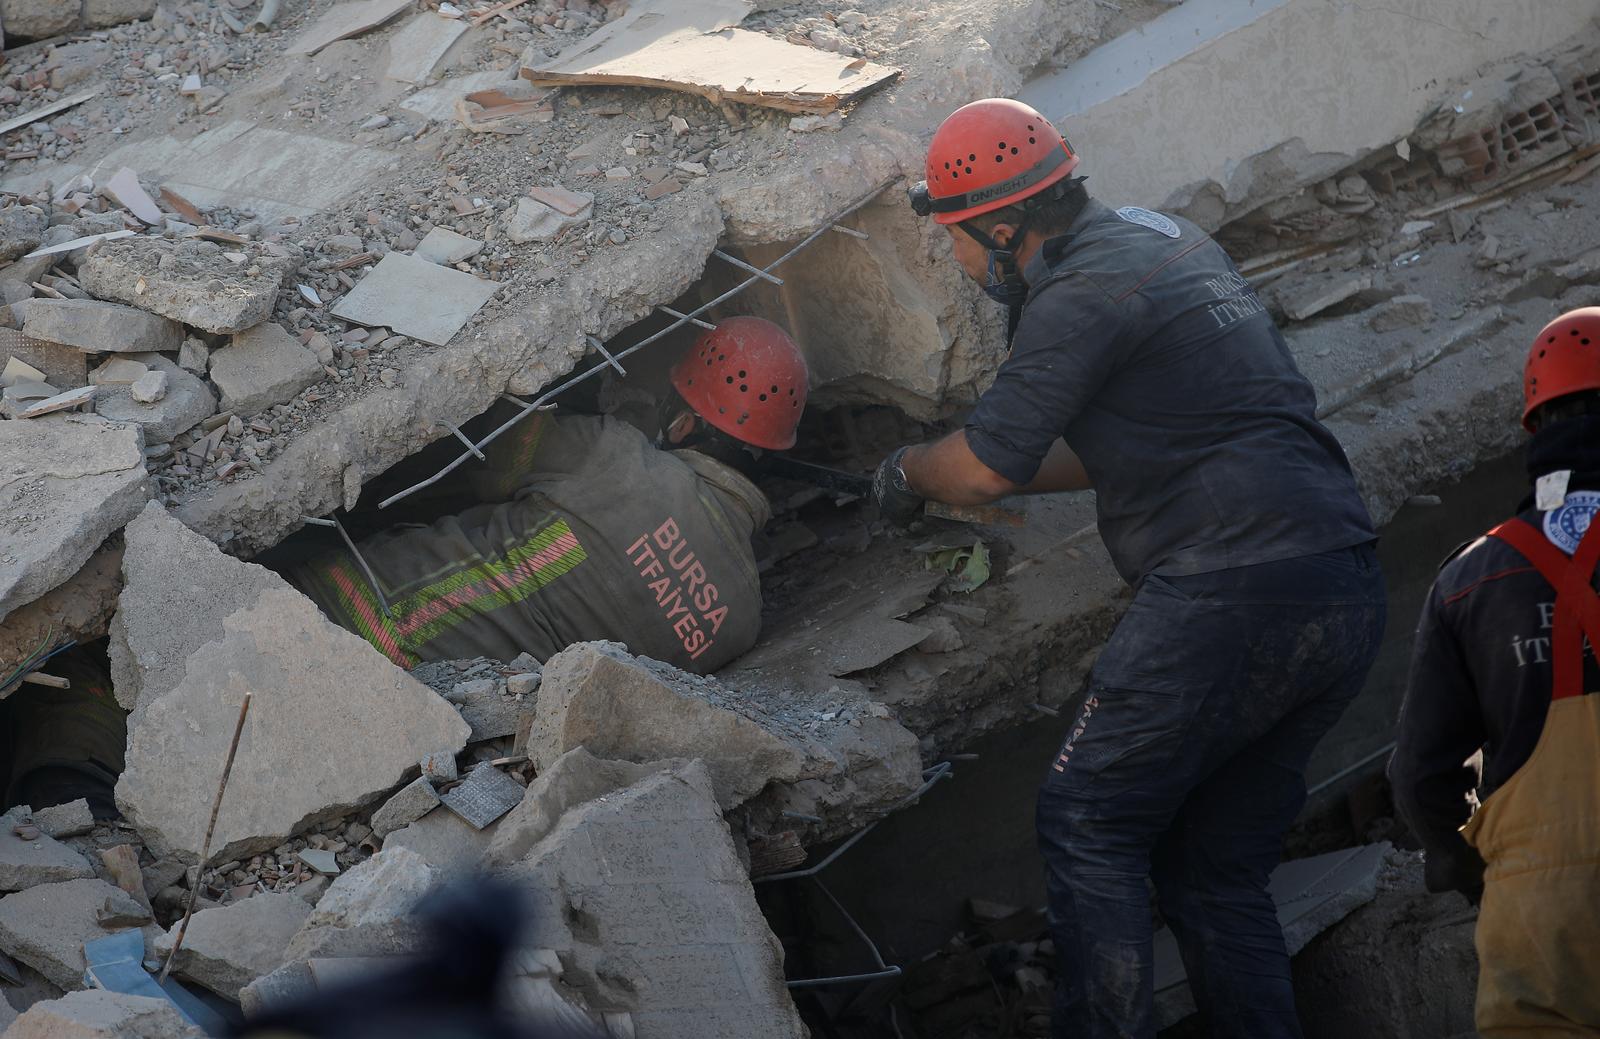 Rescue operations take place on a site after an earthquake struck the Aegean Sea, in the coastal province of Izmir, Turkey, November 2, 2020. Photo: Reuters